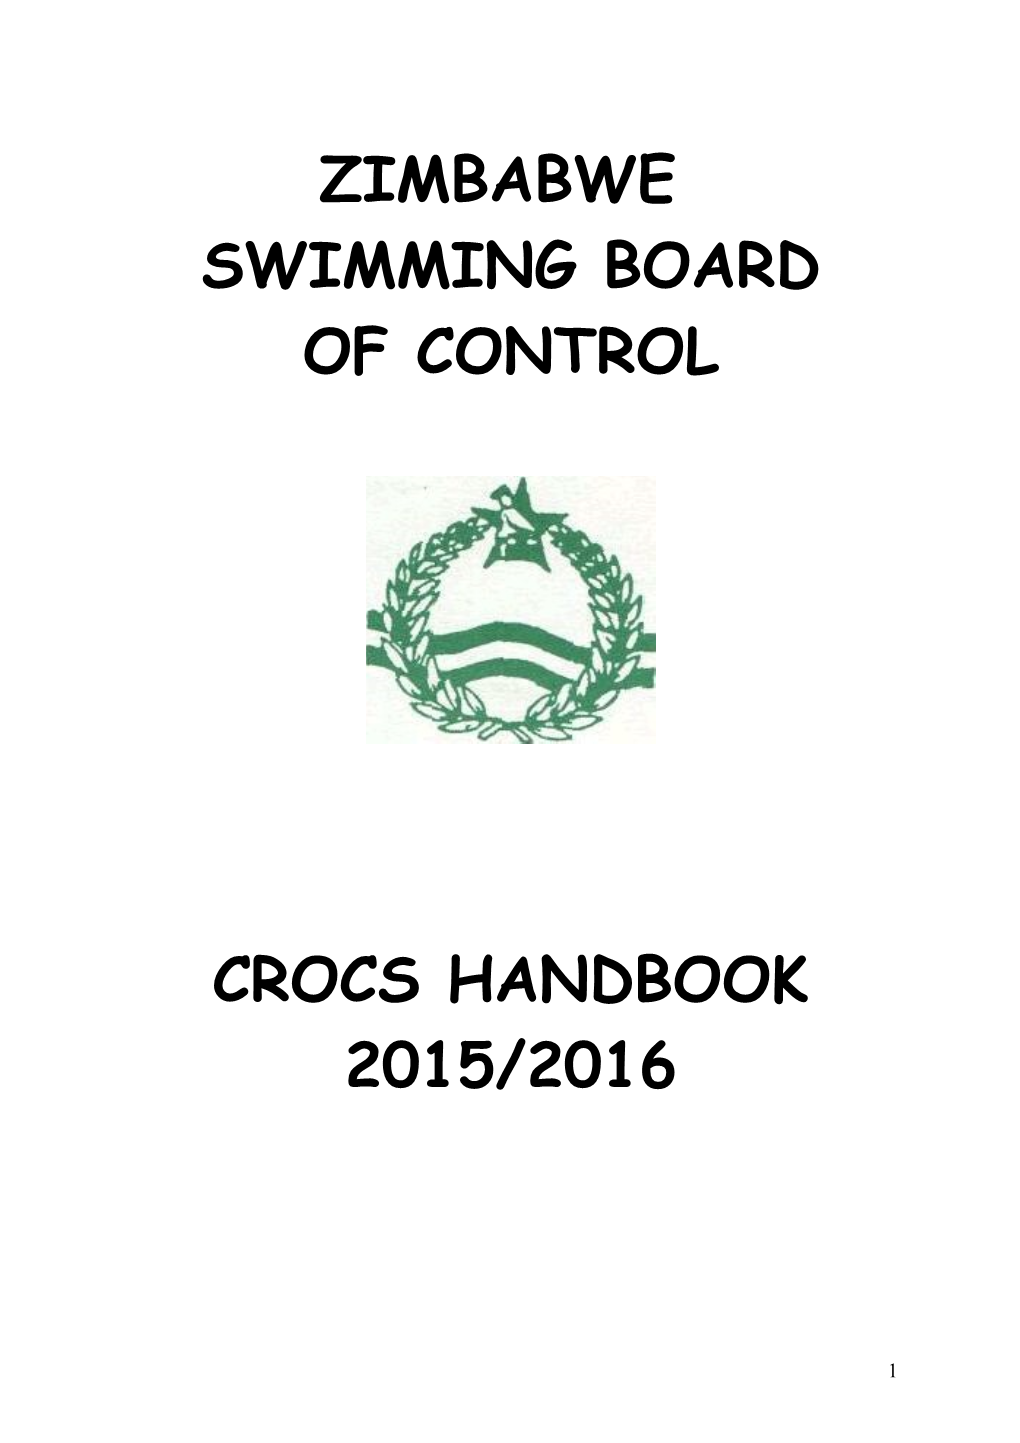 Dear Crocs Swimmers and Parents